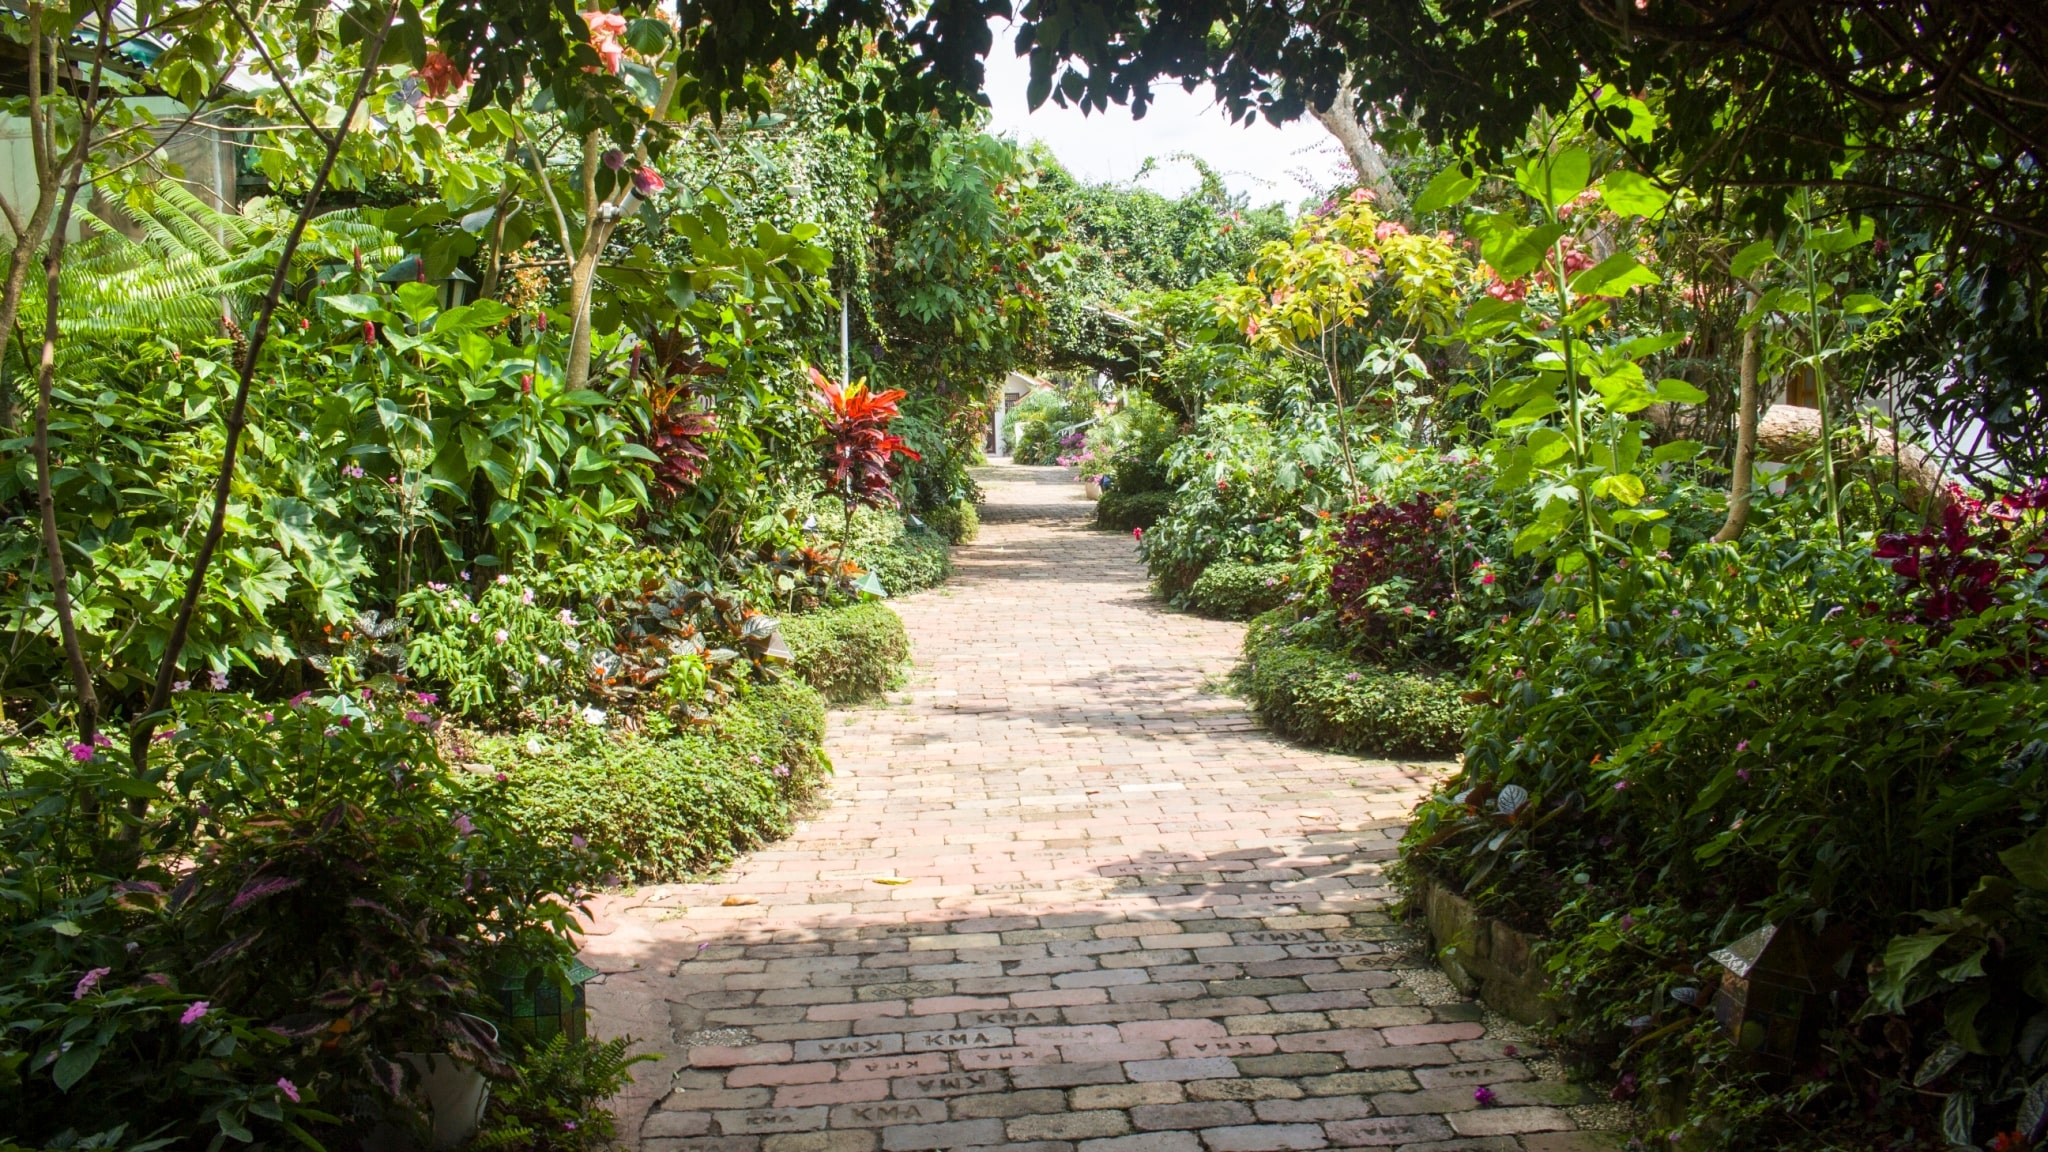 A variety of plants fill up the garden’s pathway from every direction. 【Photo by Matt Serrano】